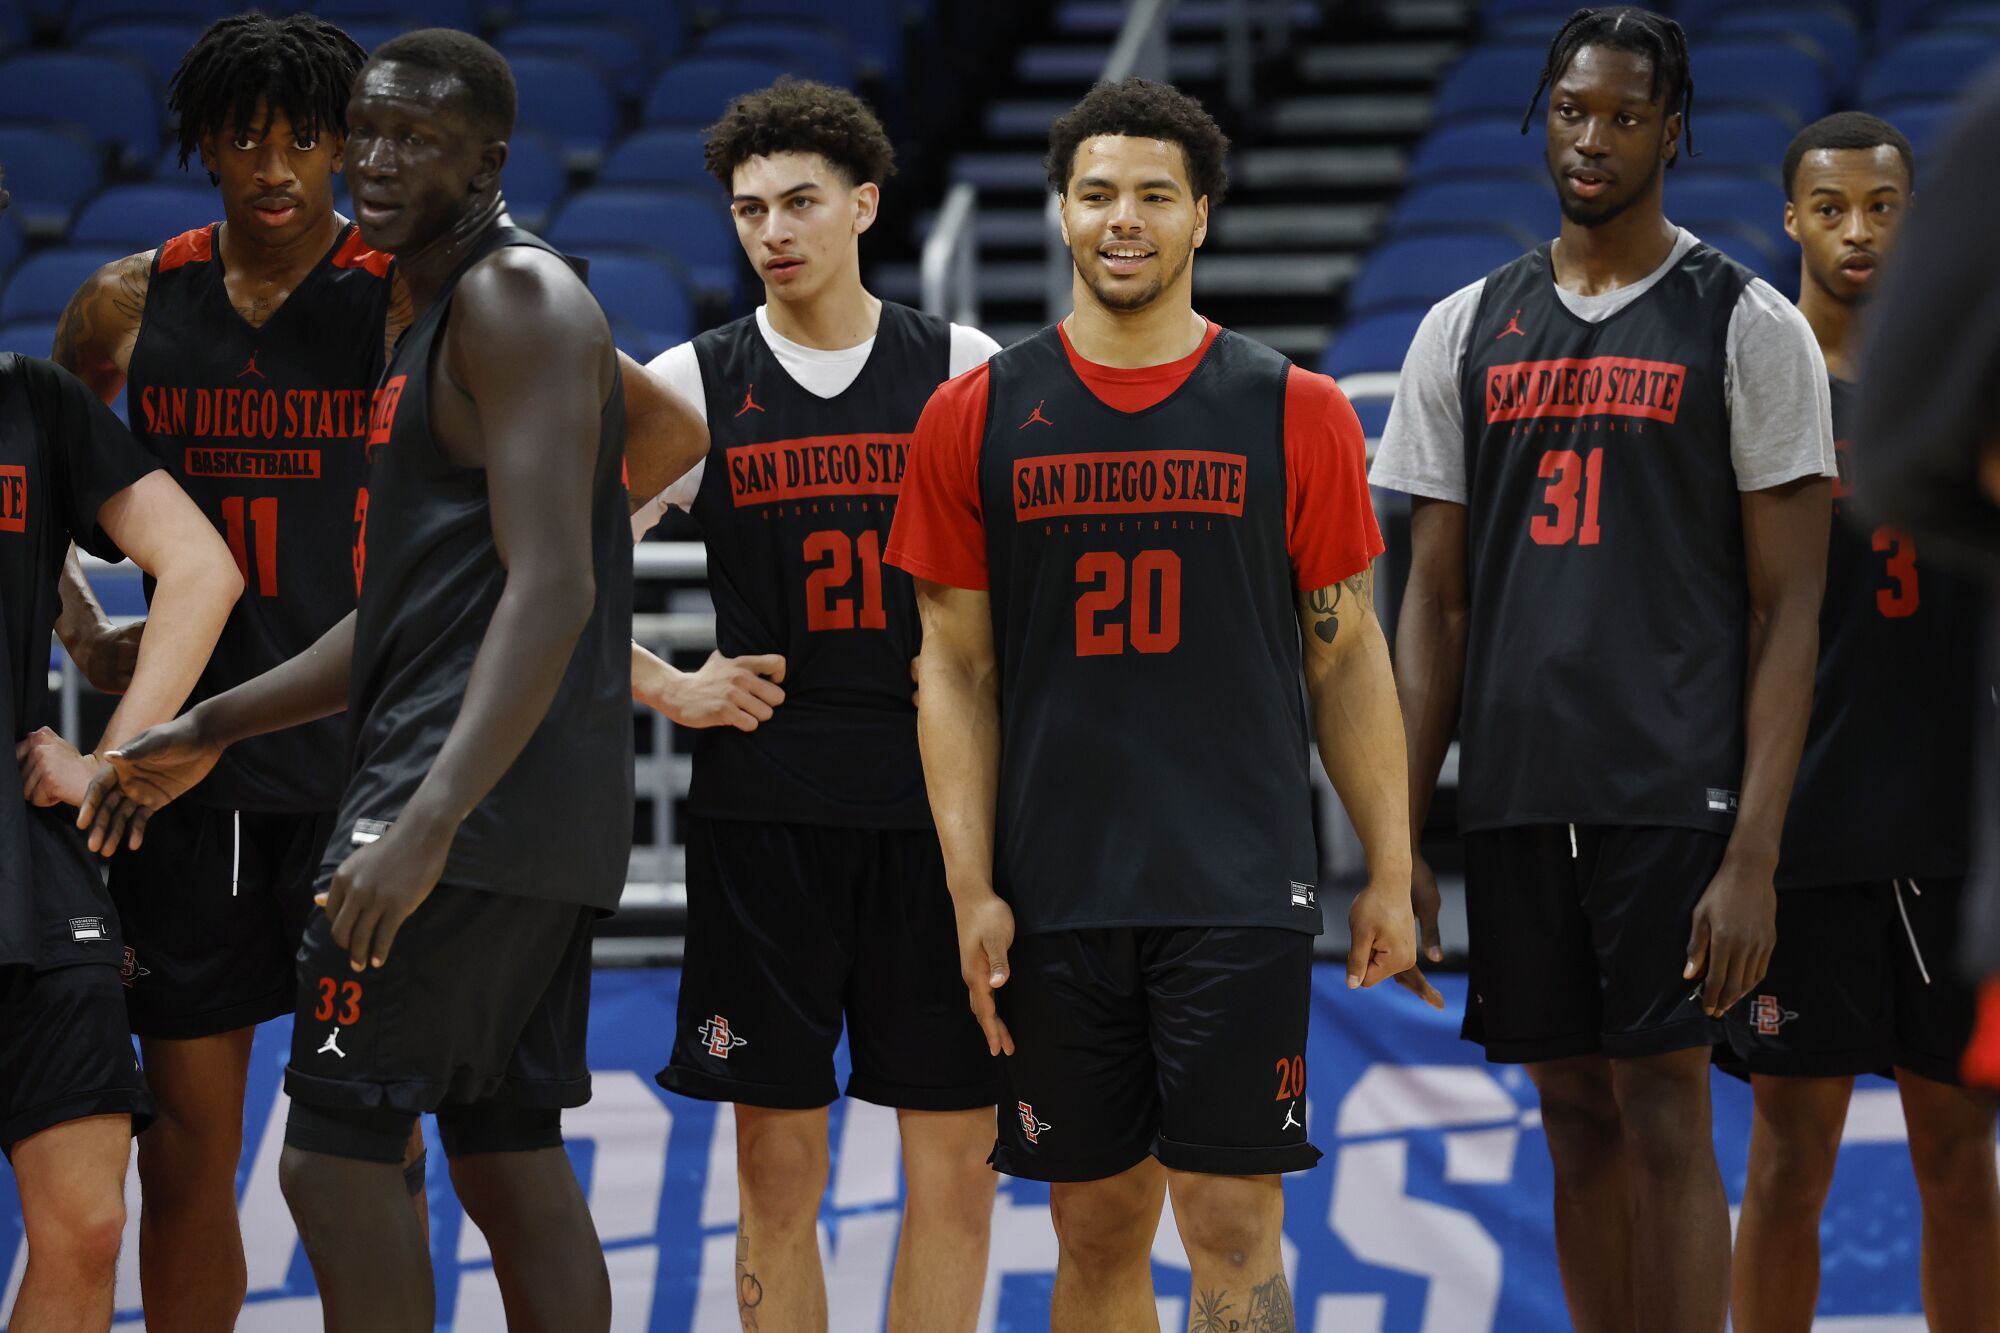 San Diego State's team looks on during Wednesday's practice at the Amway Center in Orlando, Fla.